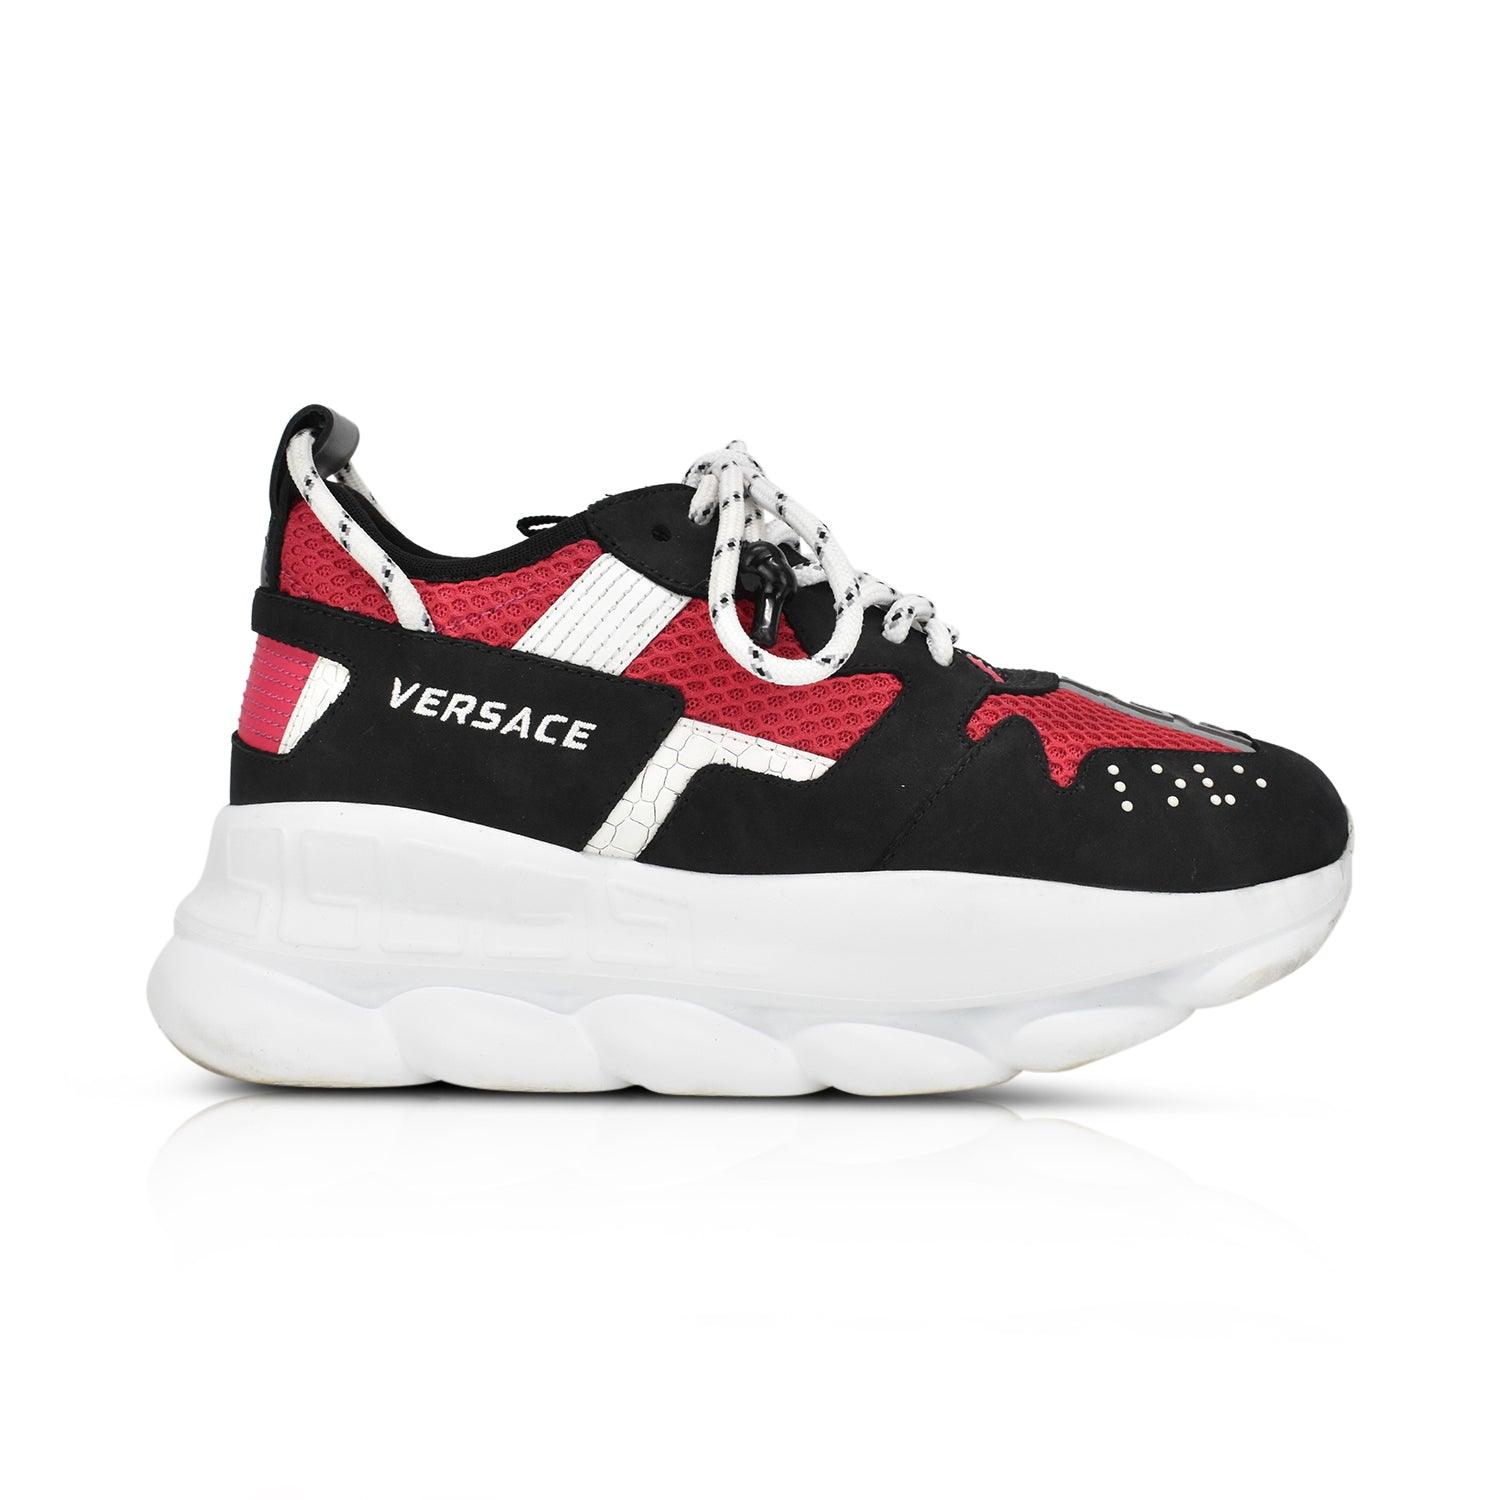 Versace 'Chain Reaction' Sneaker - Women's 38 - Fashionably Yours